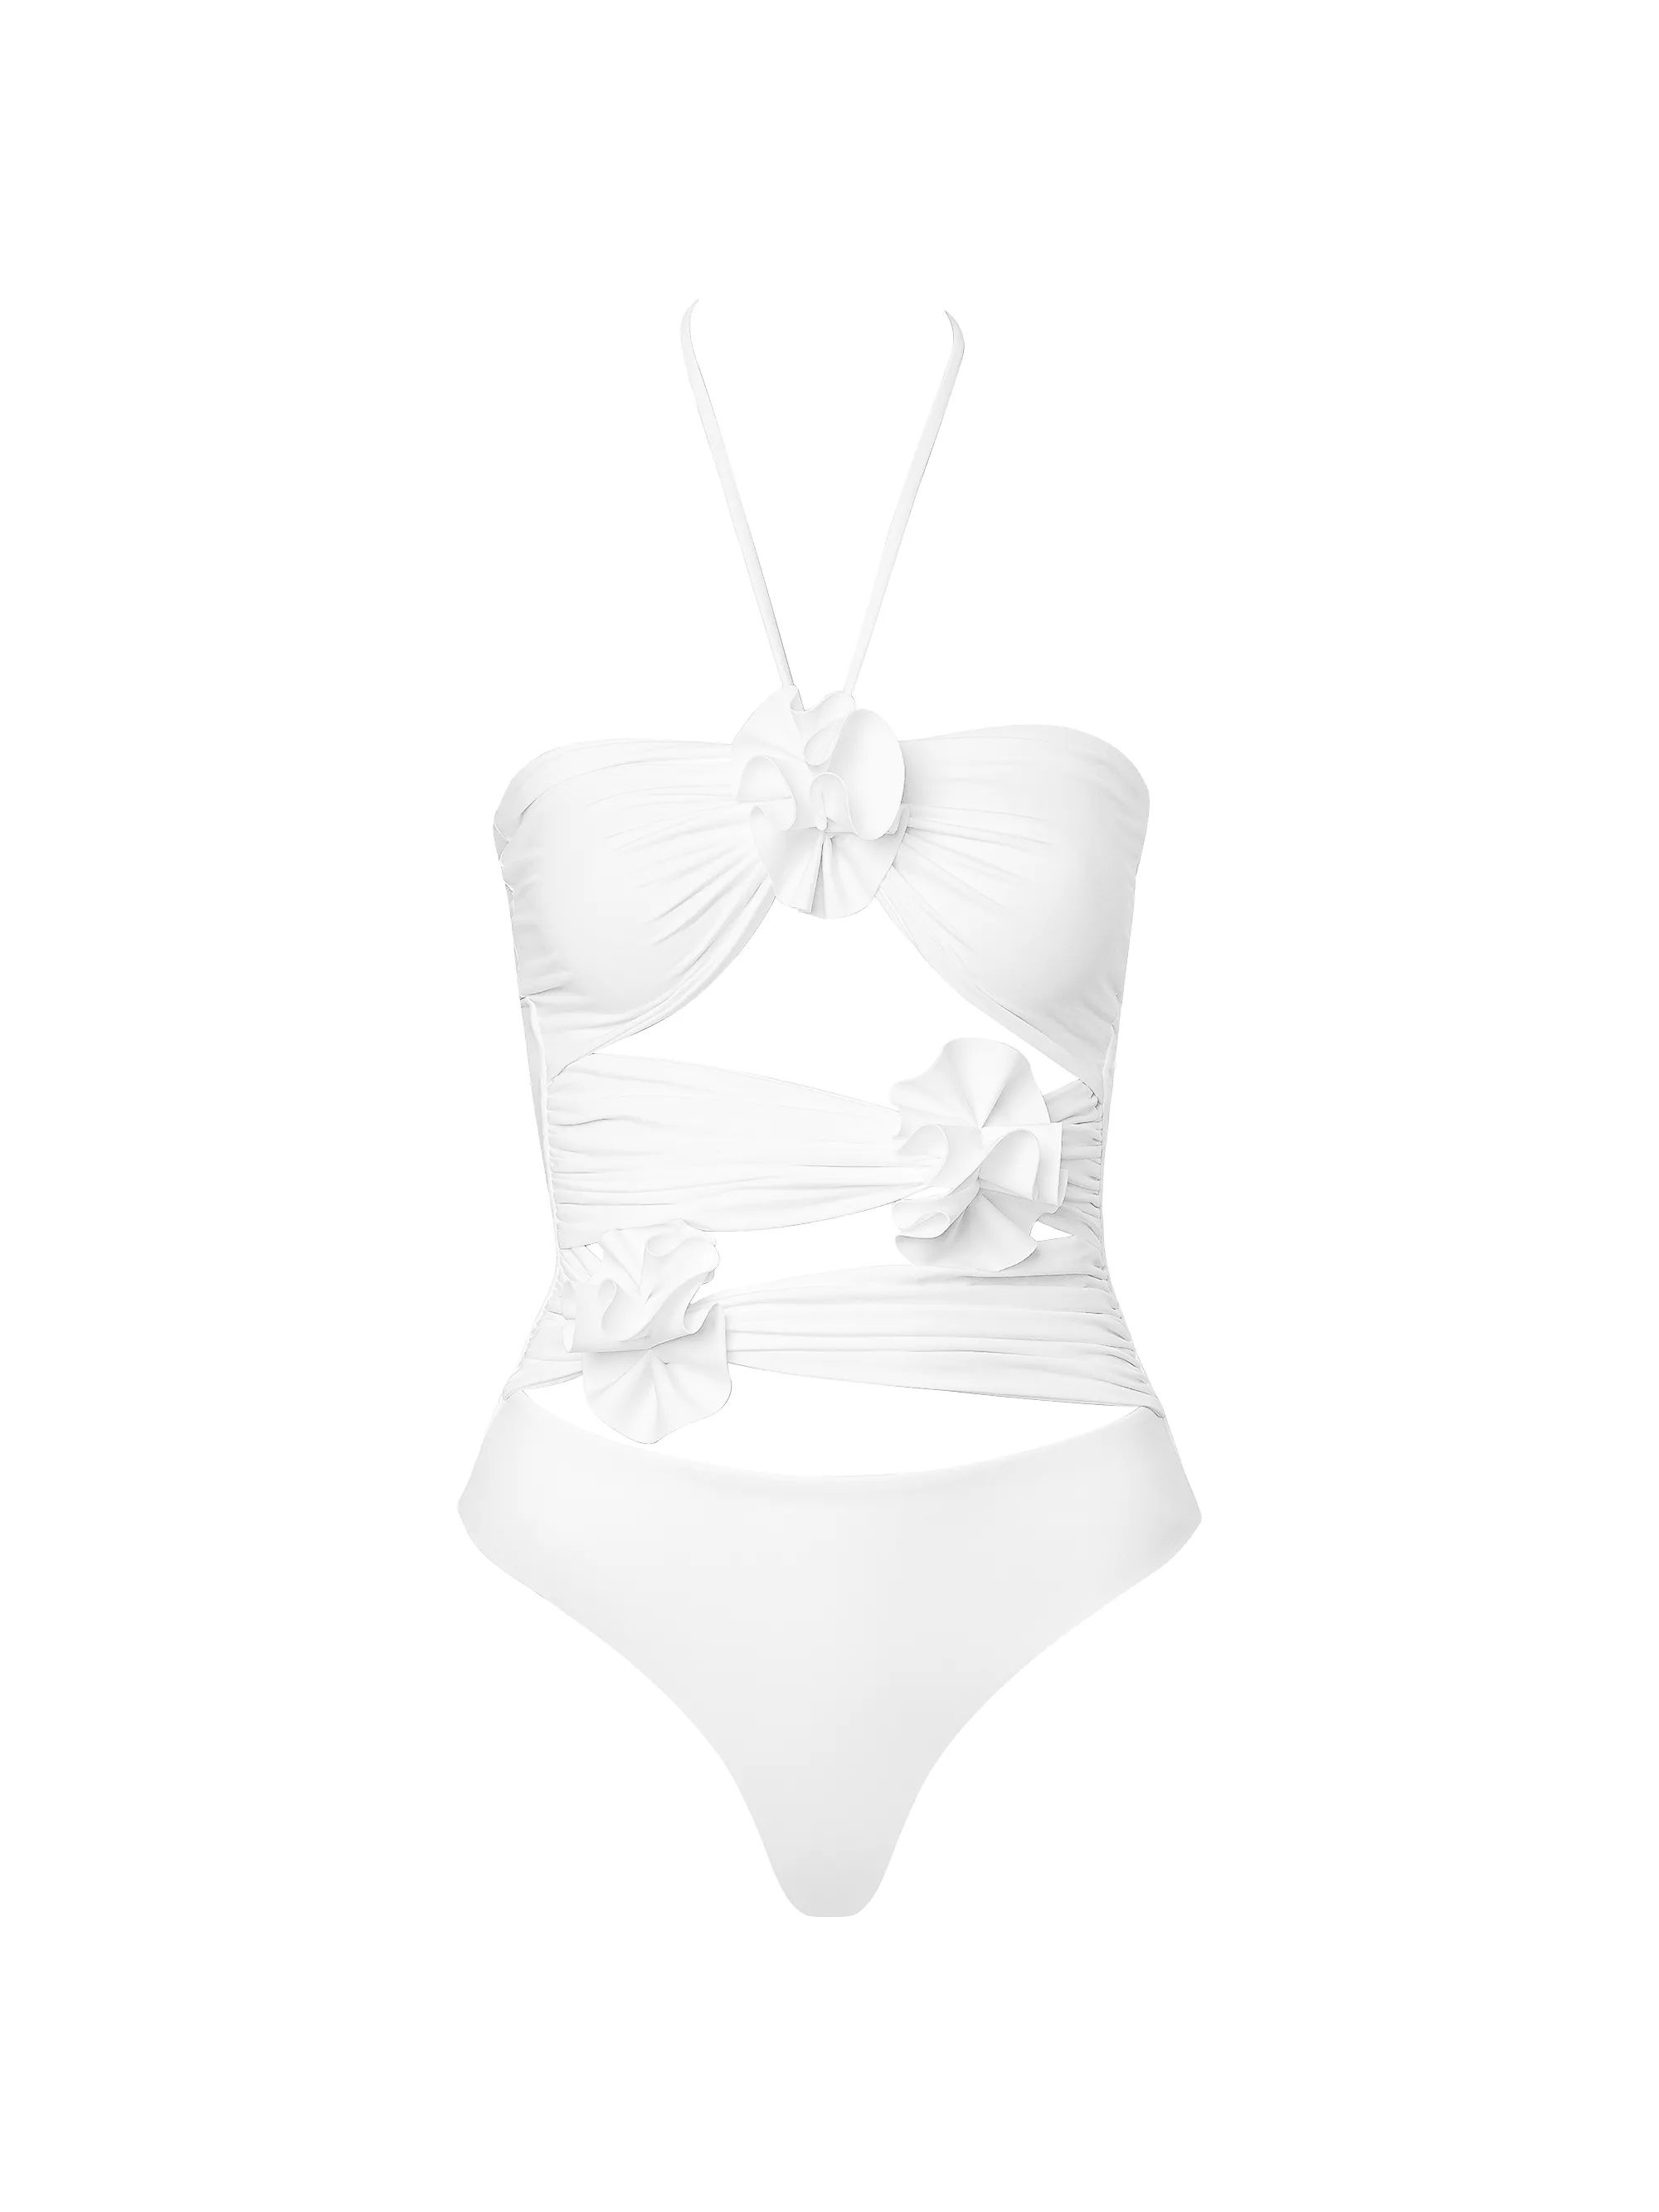 Trinitaria One-Piece Cut-Out Swimsuit | Saks Fifth Avenue